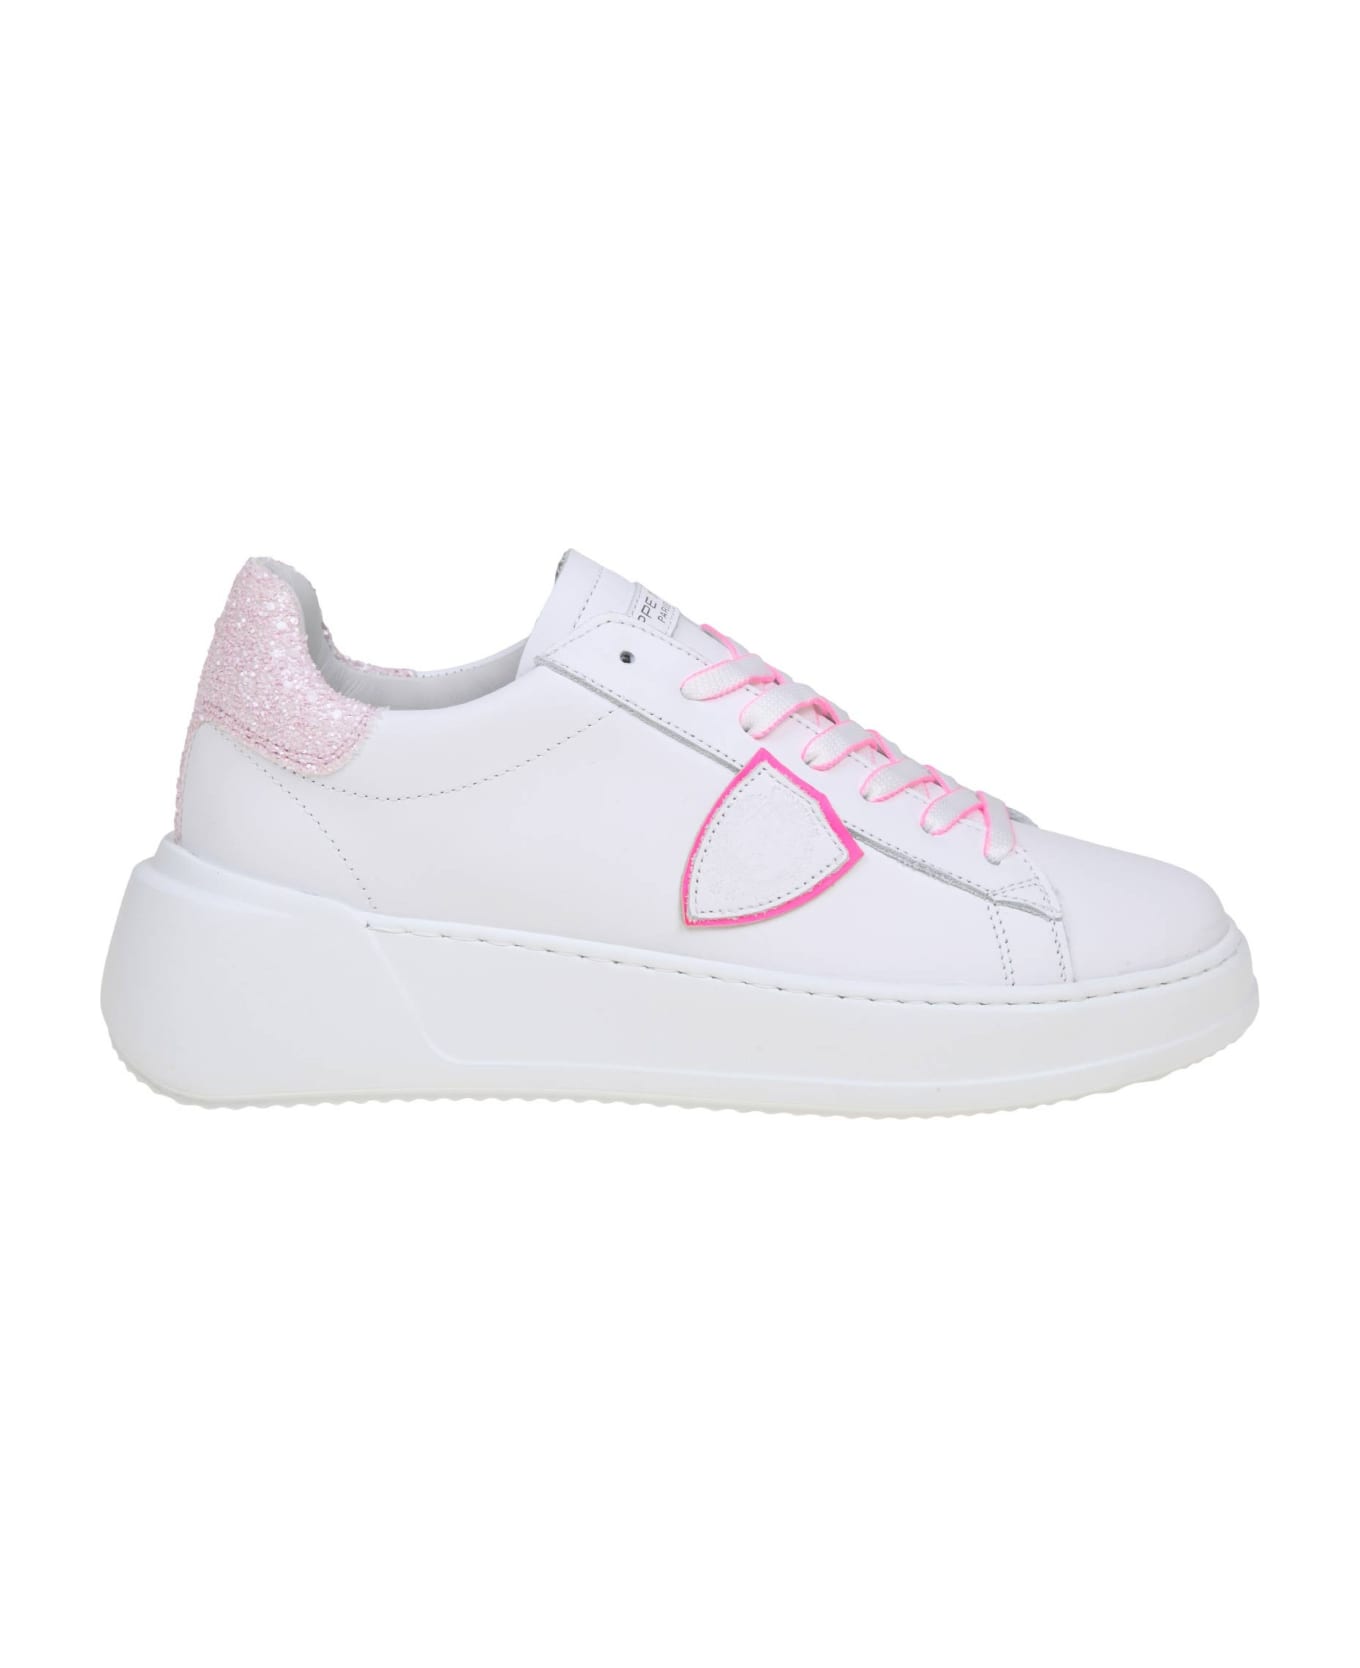 Philippe Model Tres Temple Low In White And Fuchsia Leather - Blanc/fucsia スニーカー